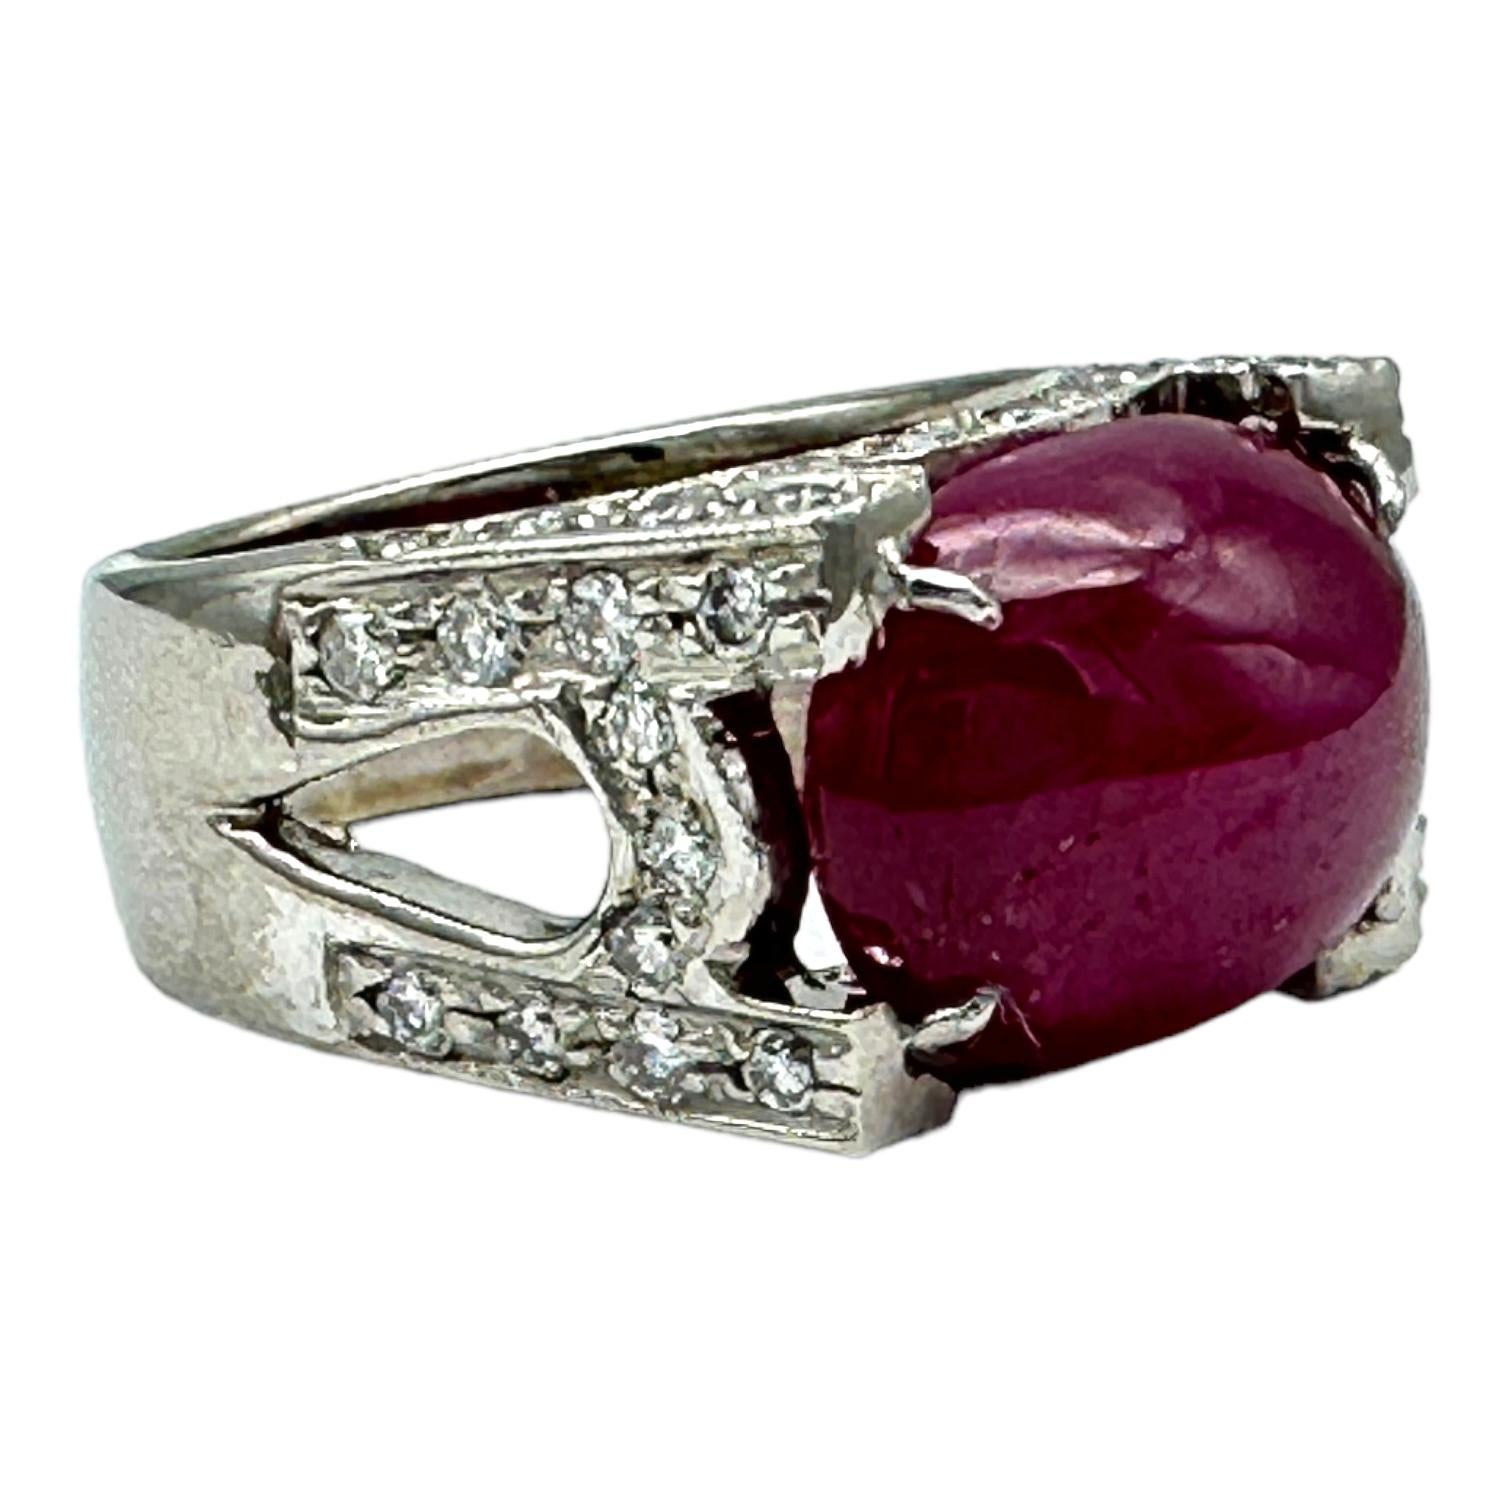  9 Carat Cabochon Ruby & Diamond Solitaire Ring 10.50 CTW For Sale 1